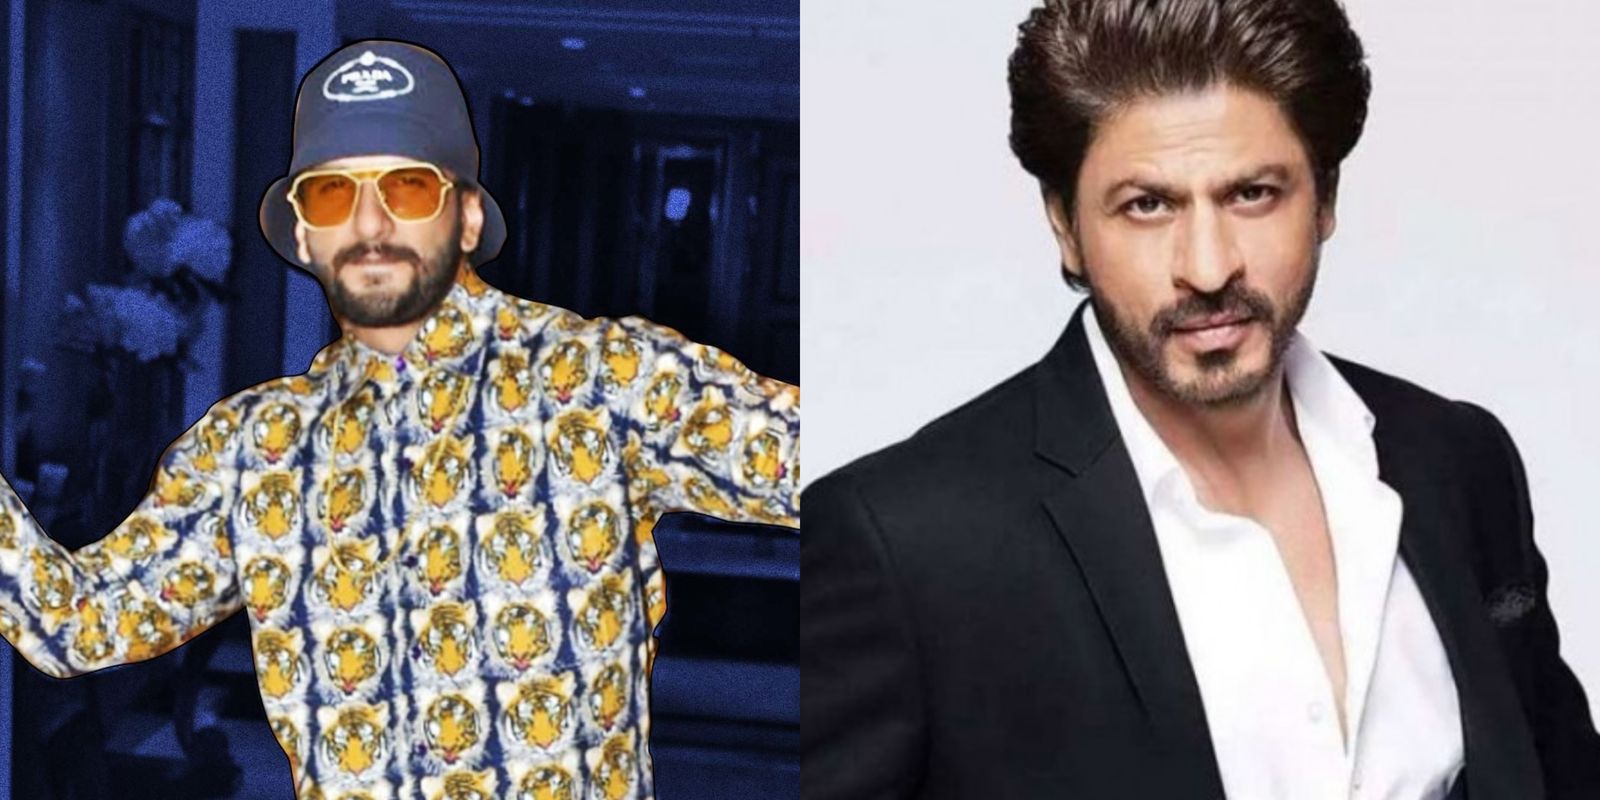 Ranveer Singh And Shah Rukh Khan To Star Together In Mr. India Remake? Ali Abbas Zafar's Casting Coup Of The Decade!